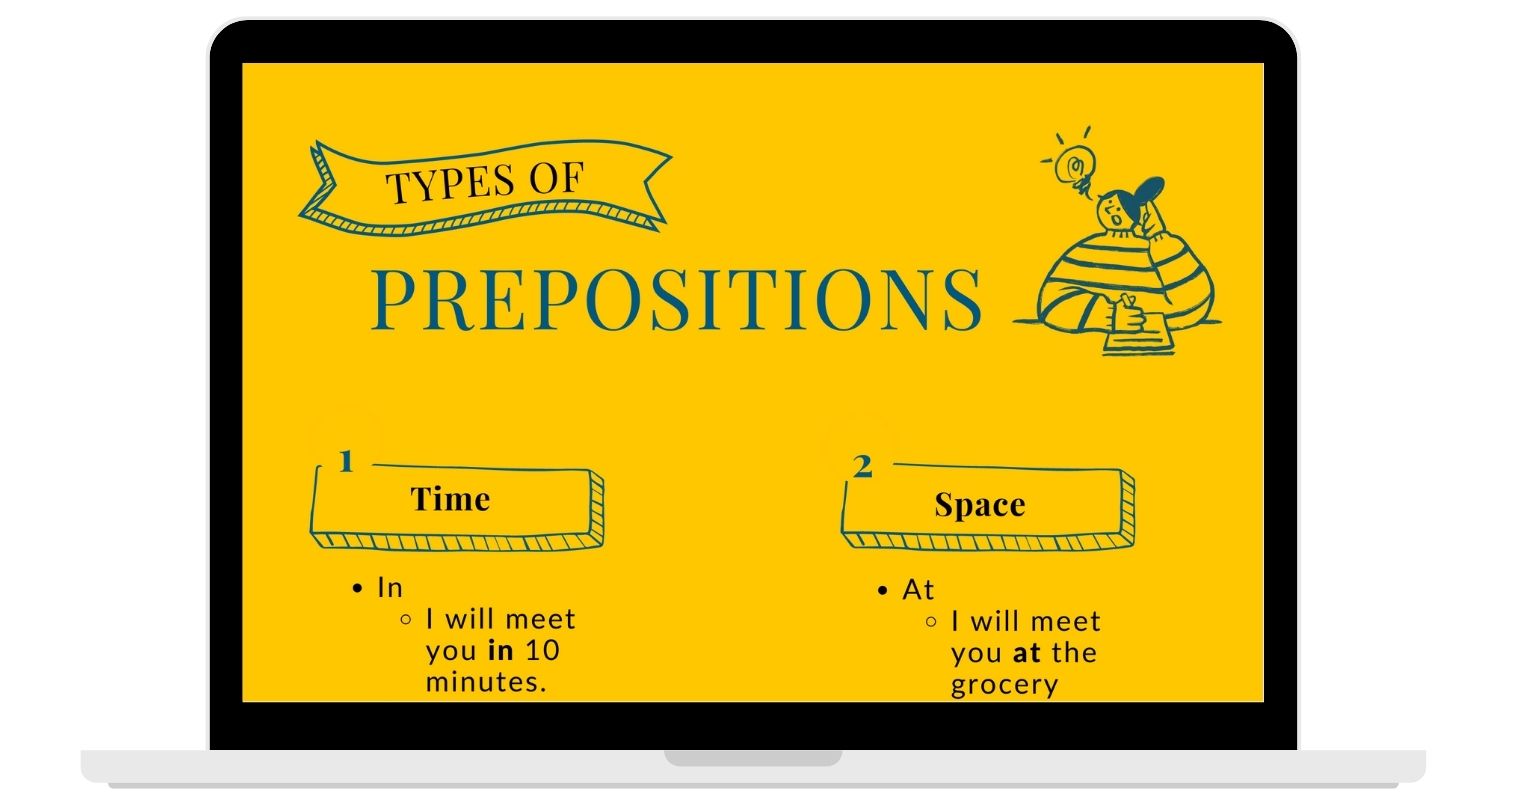 Types of Prepositions